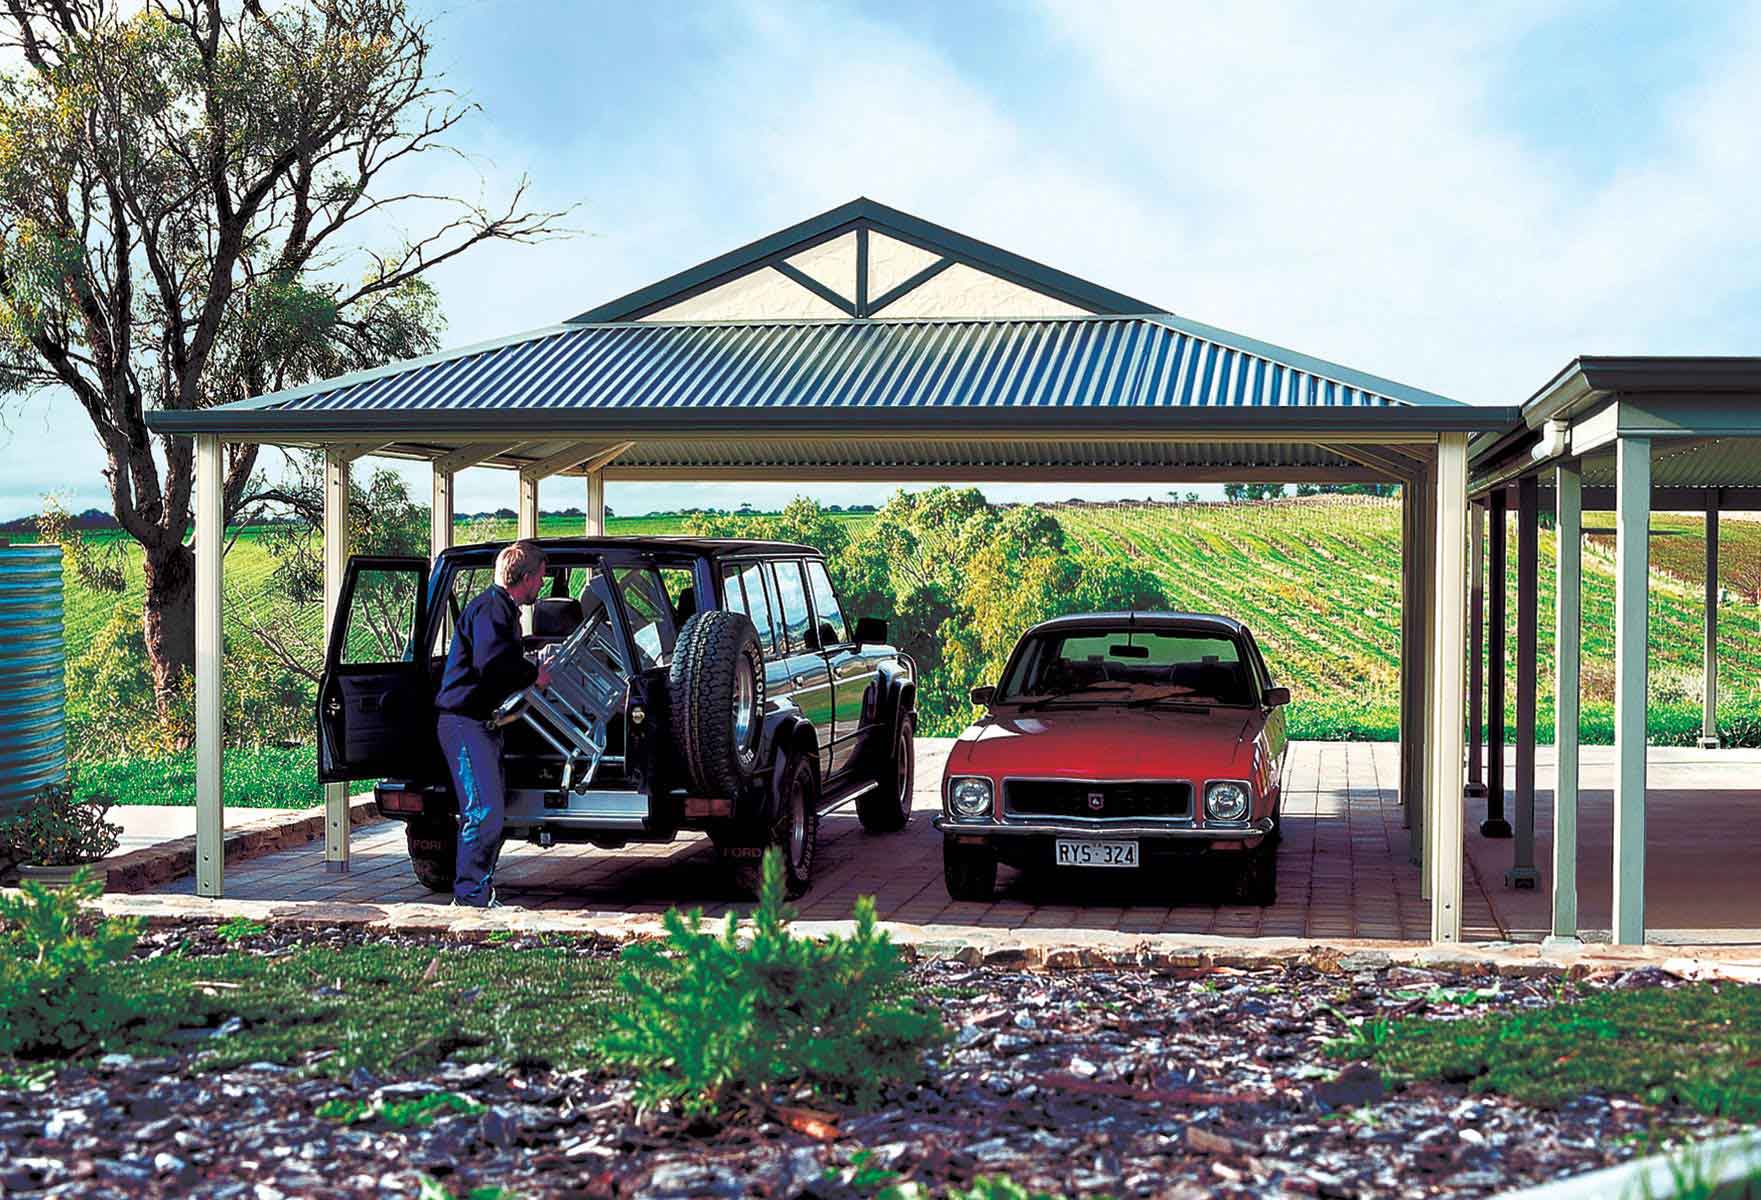 How To Design A Carport: Everything You Need to Consider